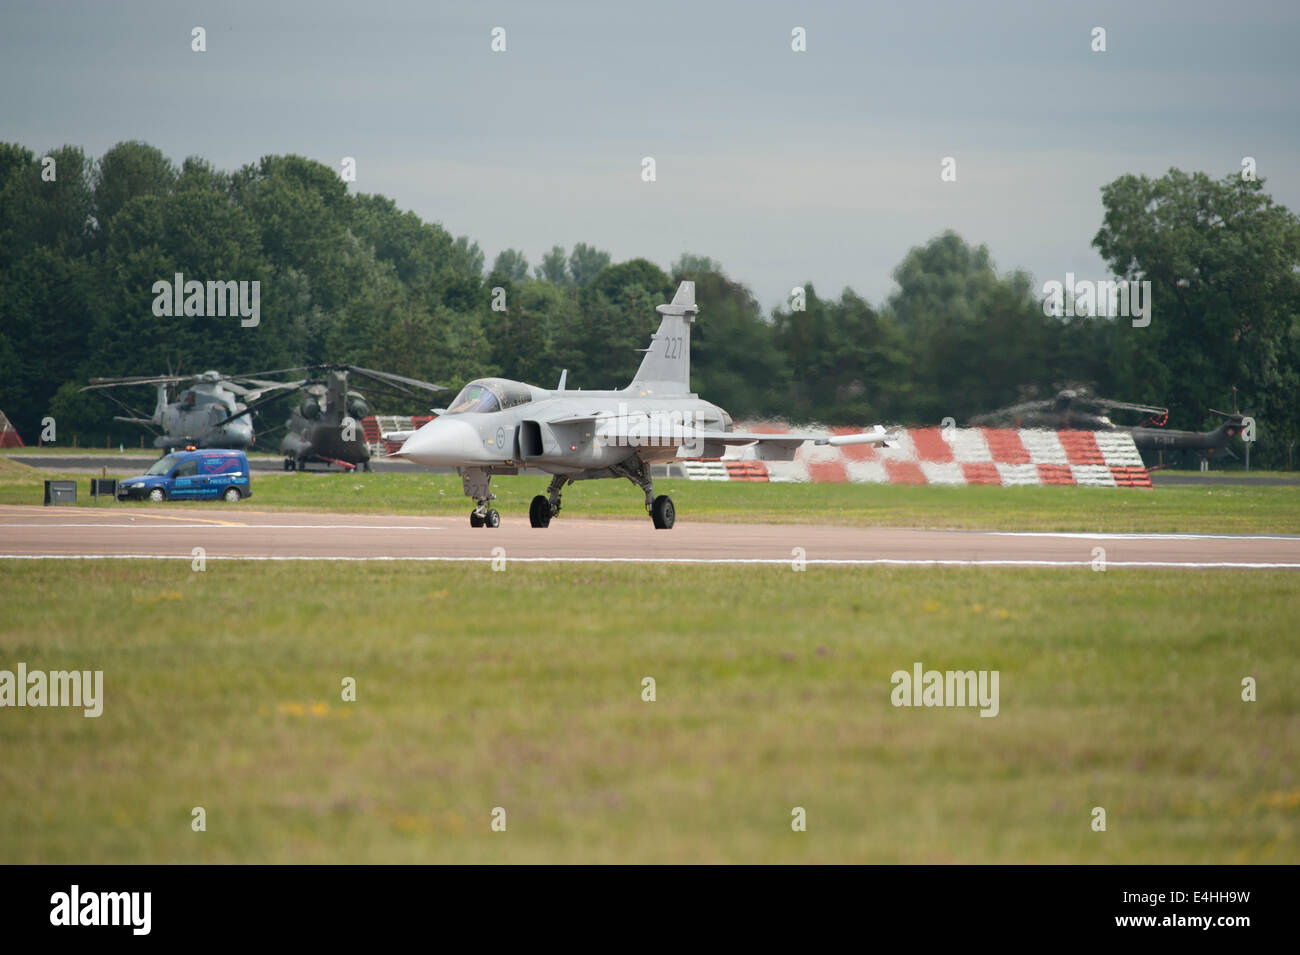 RAF Fairford, Gloucestershire UK. 11th July 2014. Fast jets on display at the first day of RIAT. Swedish Air Force JAS 39C Gripen awaits clearance for take-off on the runway. Credit:  Malcolm Park editorial/Alamy Live News Stock Photo